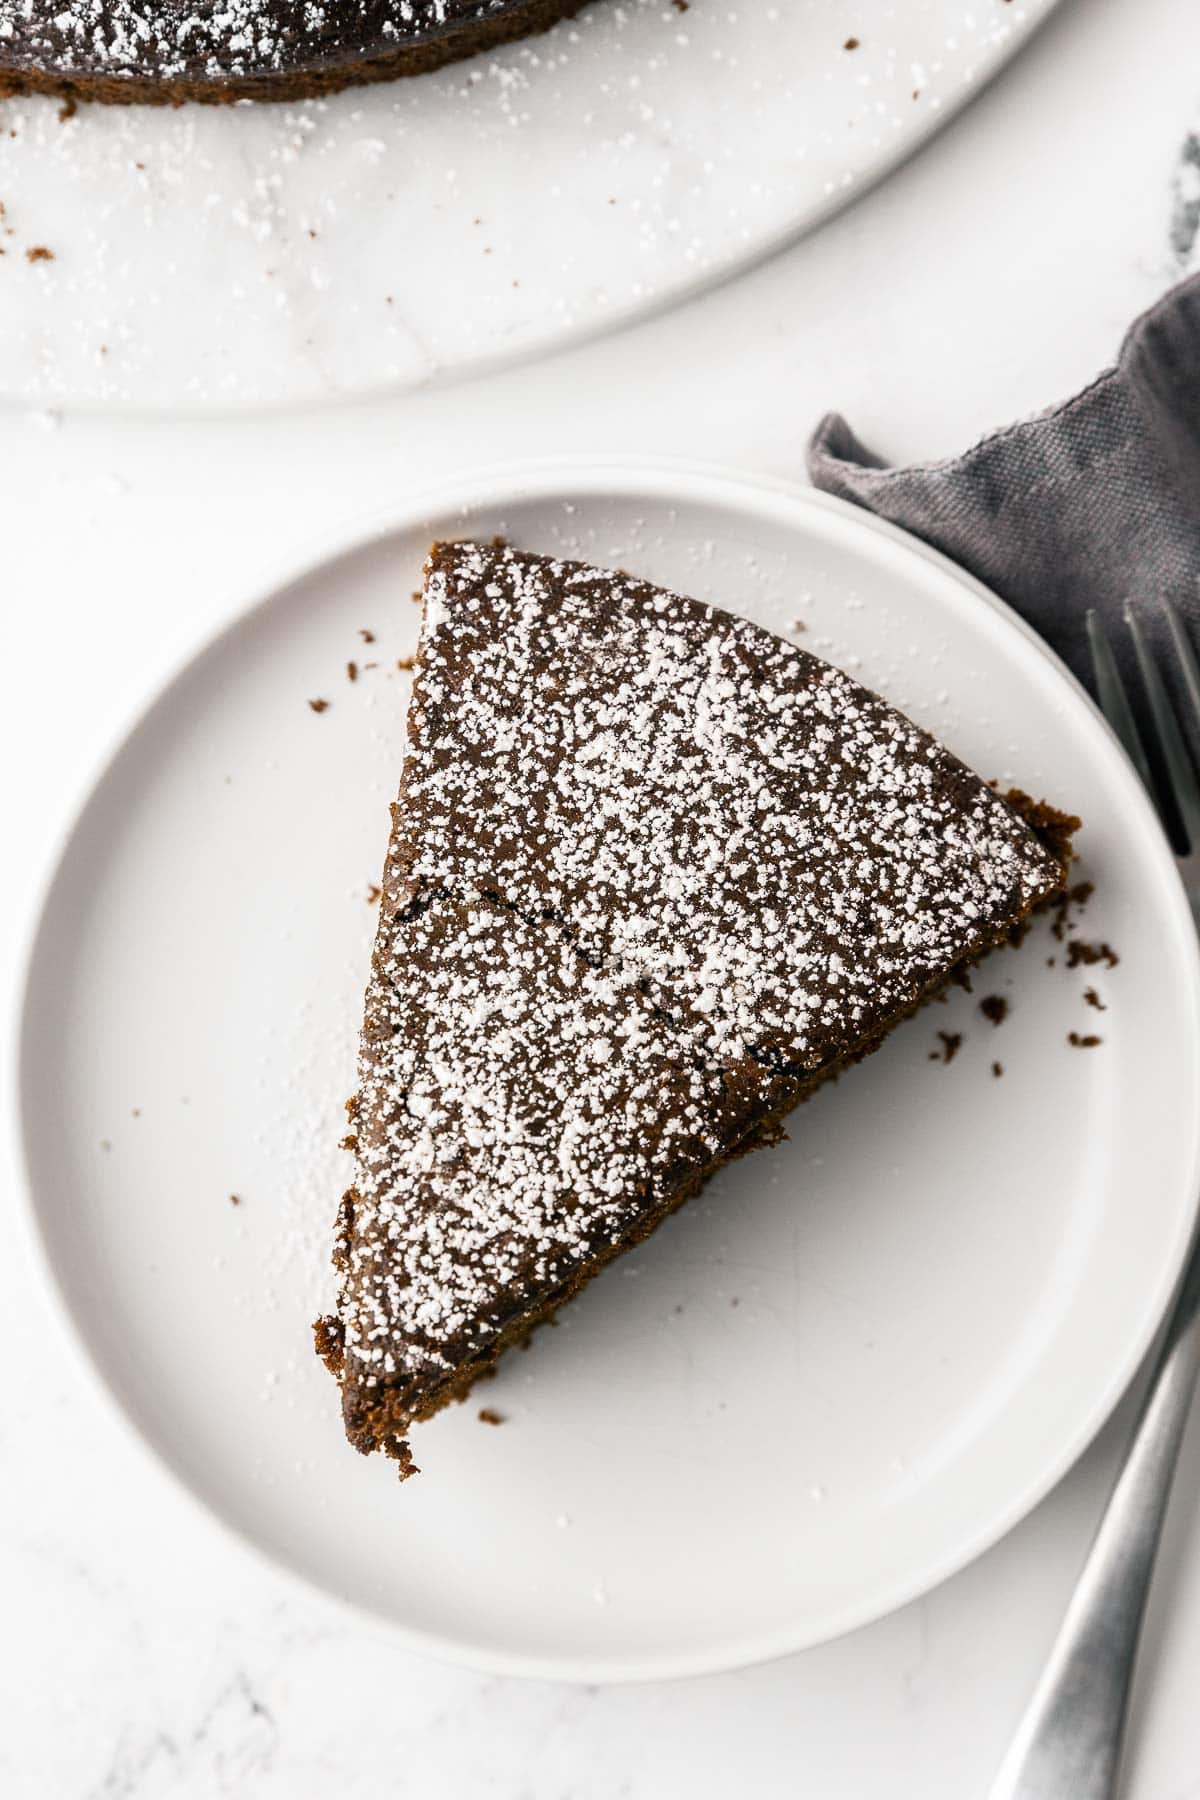 Overhead shot of a slice of chocolate olive oil cake with powdered sugar on a small white plate, forks and napkin nearby.